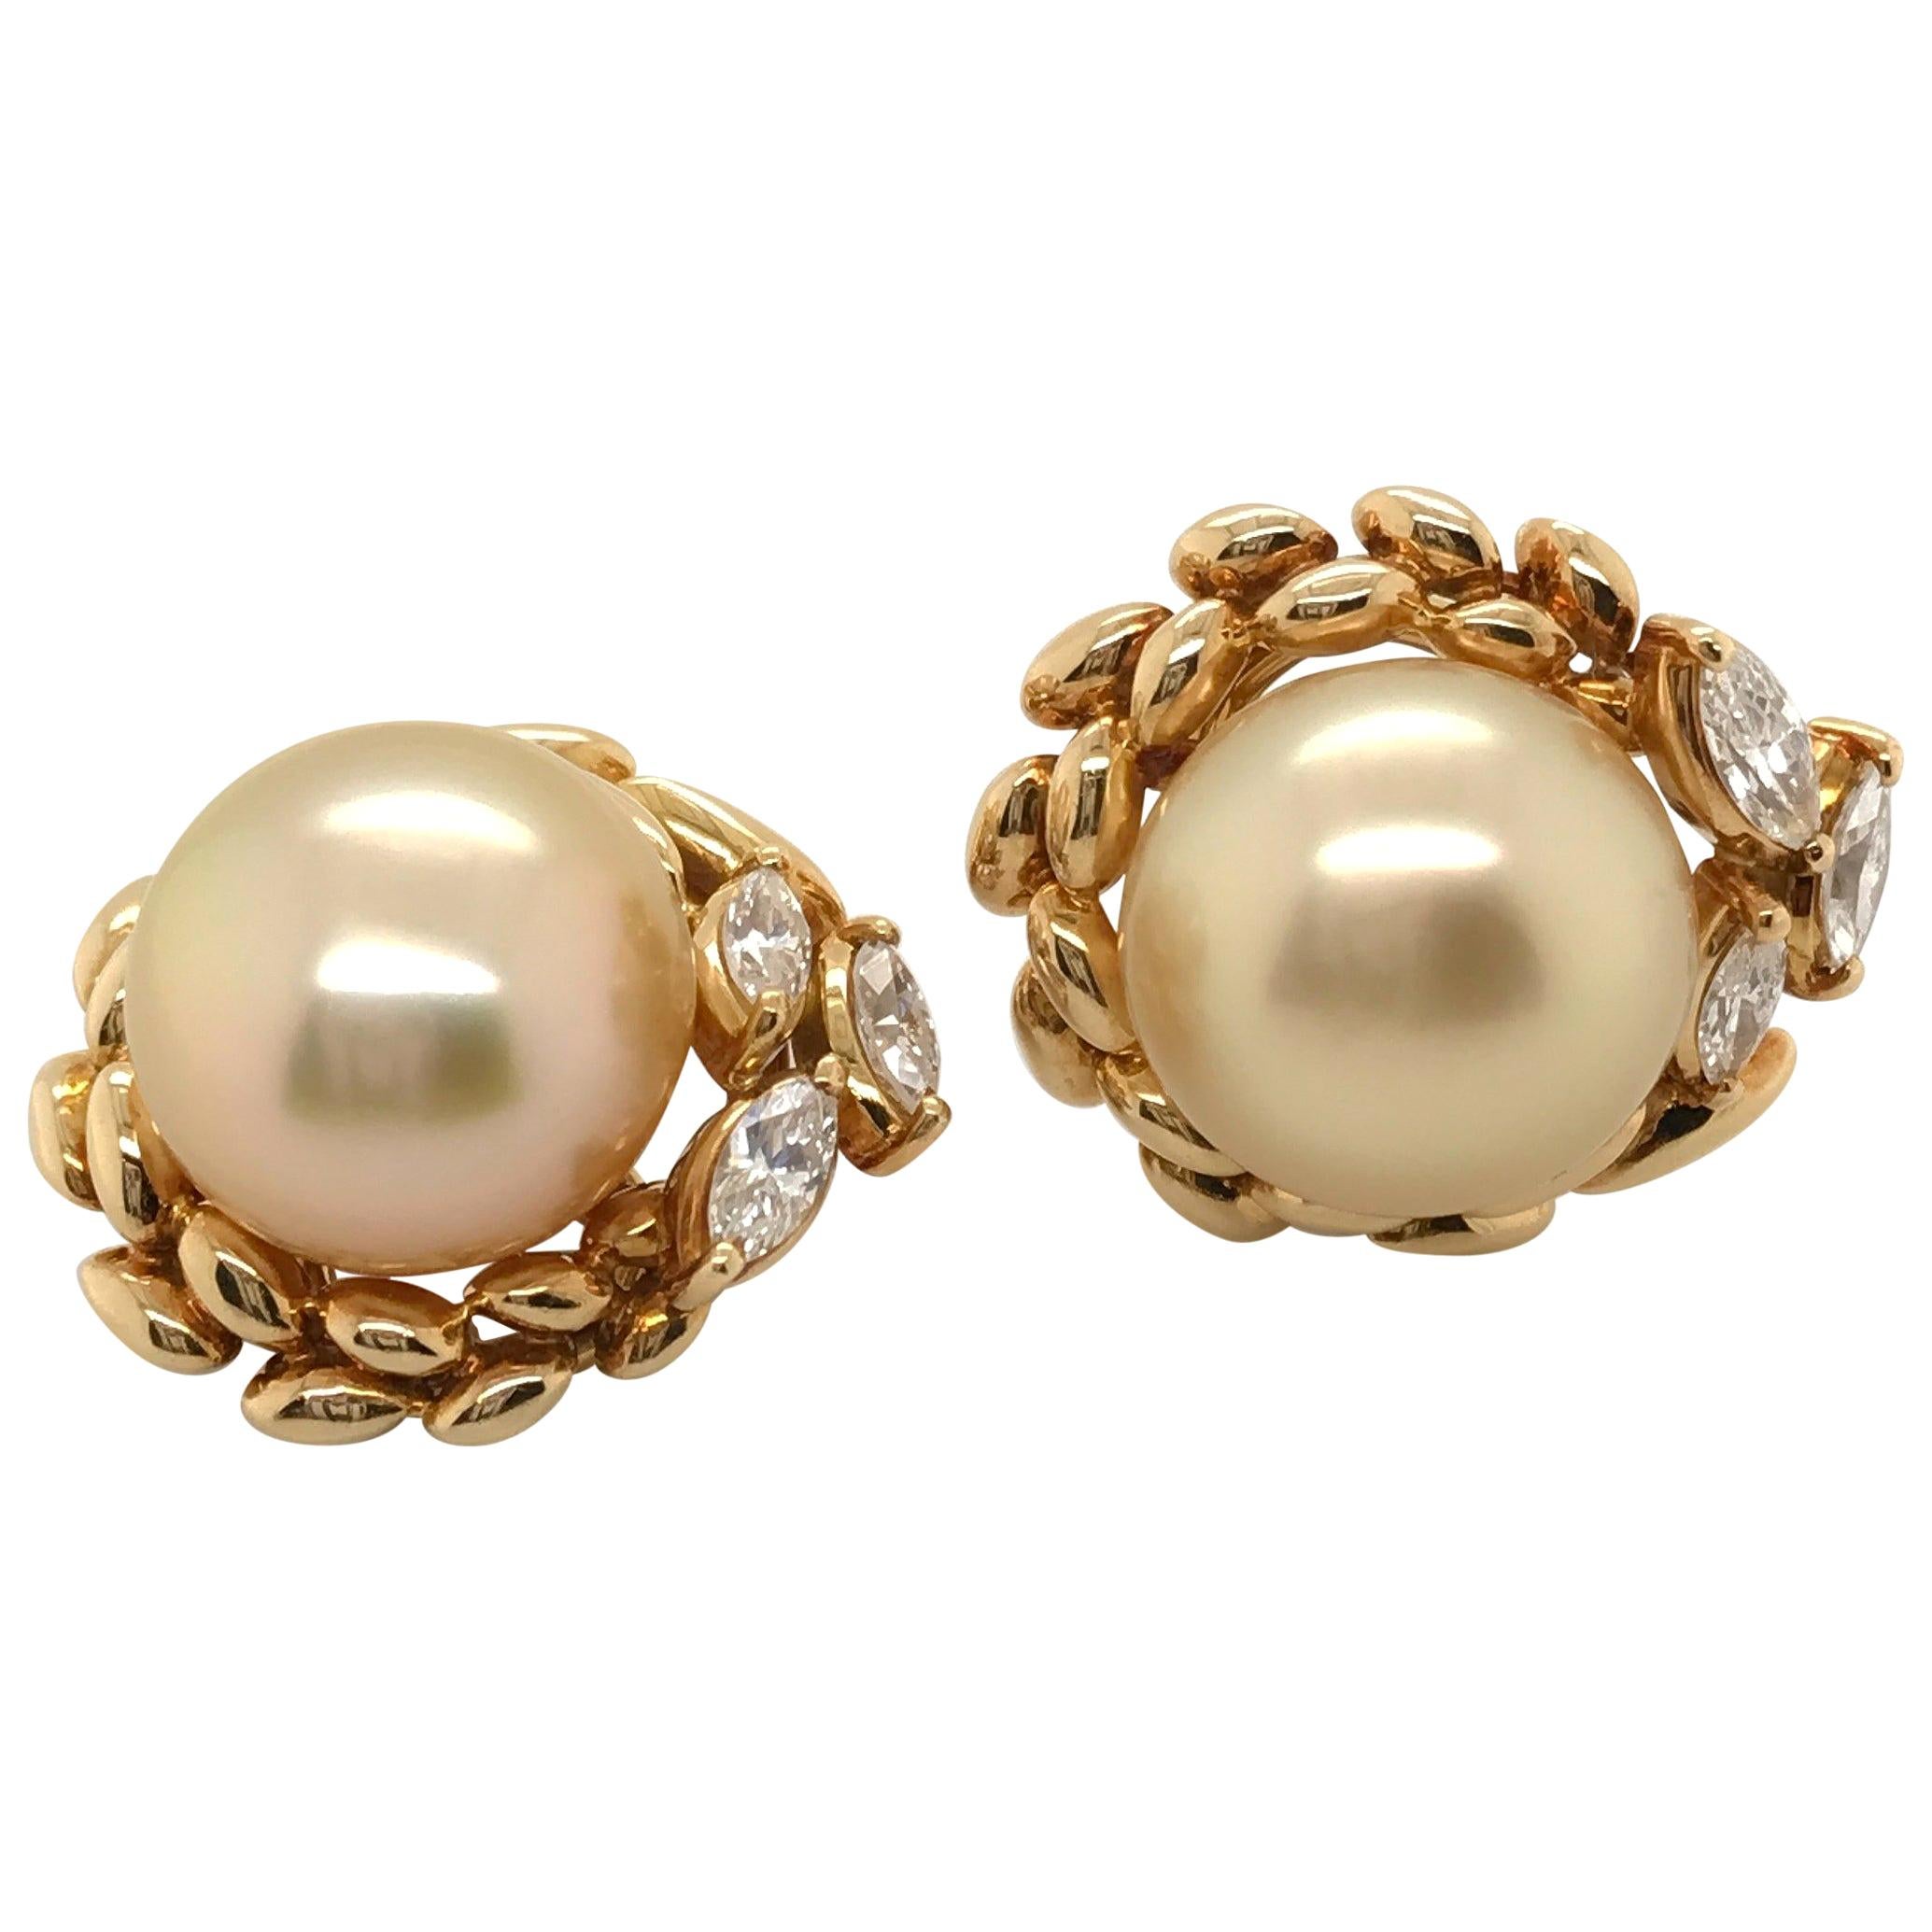 Gold South Sea Cultured Pearl and Diamond 18 Karat Yellow Gold Ear Clips